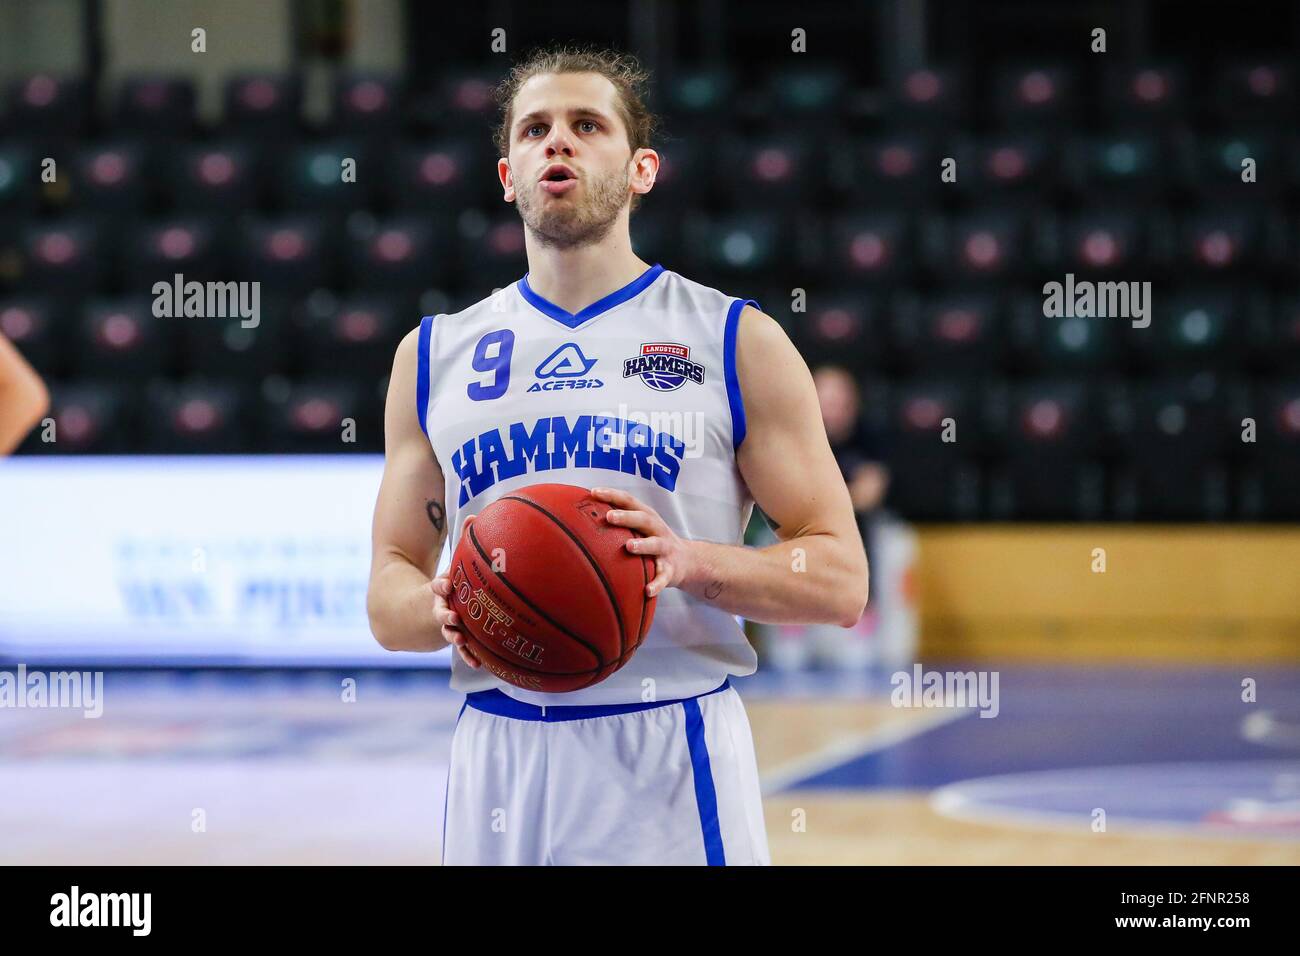 ZWOLLE, NETHERLANDS - MAY 18: Mike Schilder of Landstede Hammers Zwolle during the DBL semi final play offs match between Landstede Hammers and ZZ Leiden at Landstede sportcentrum on May 18, 2021 in Zwolle, Netherlands (Photo by Albert ten Hove/Orange Pictures) Stock Photo